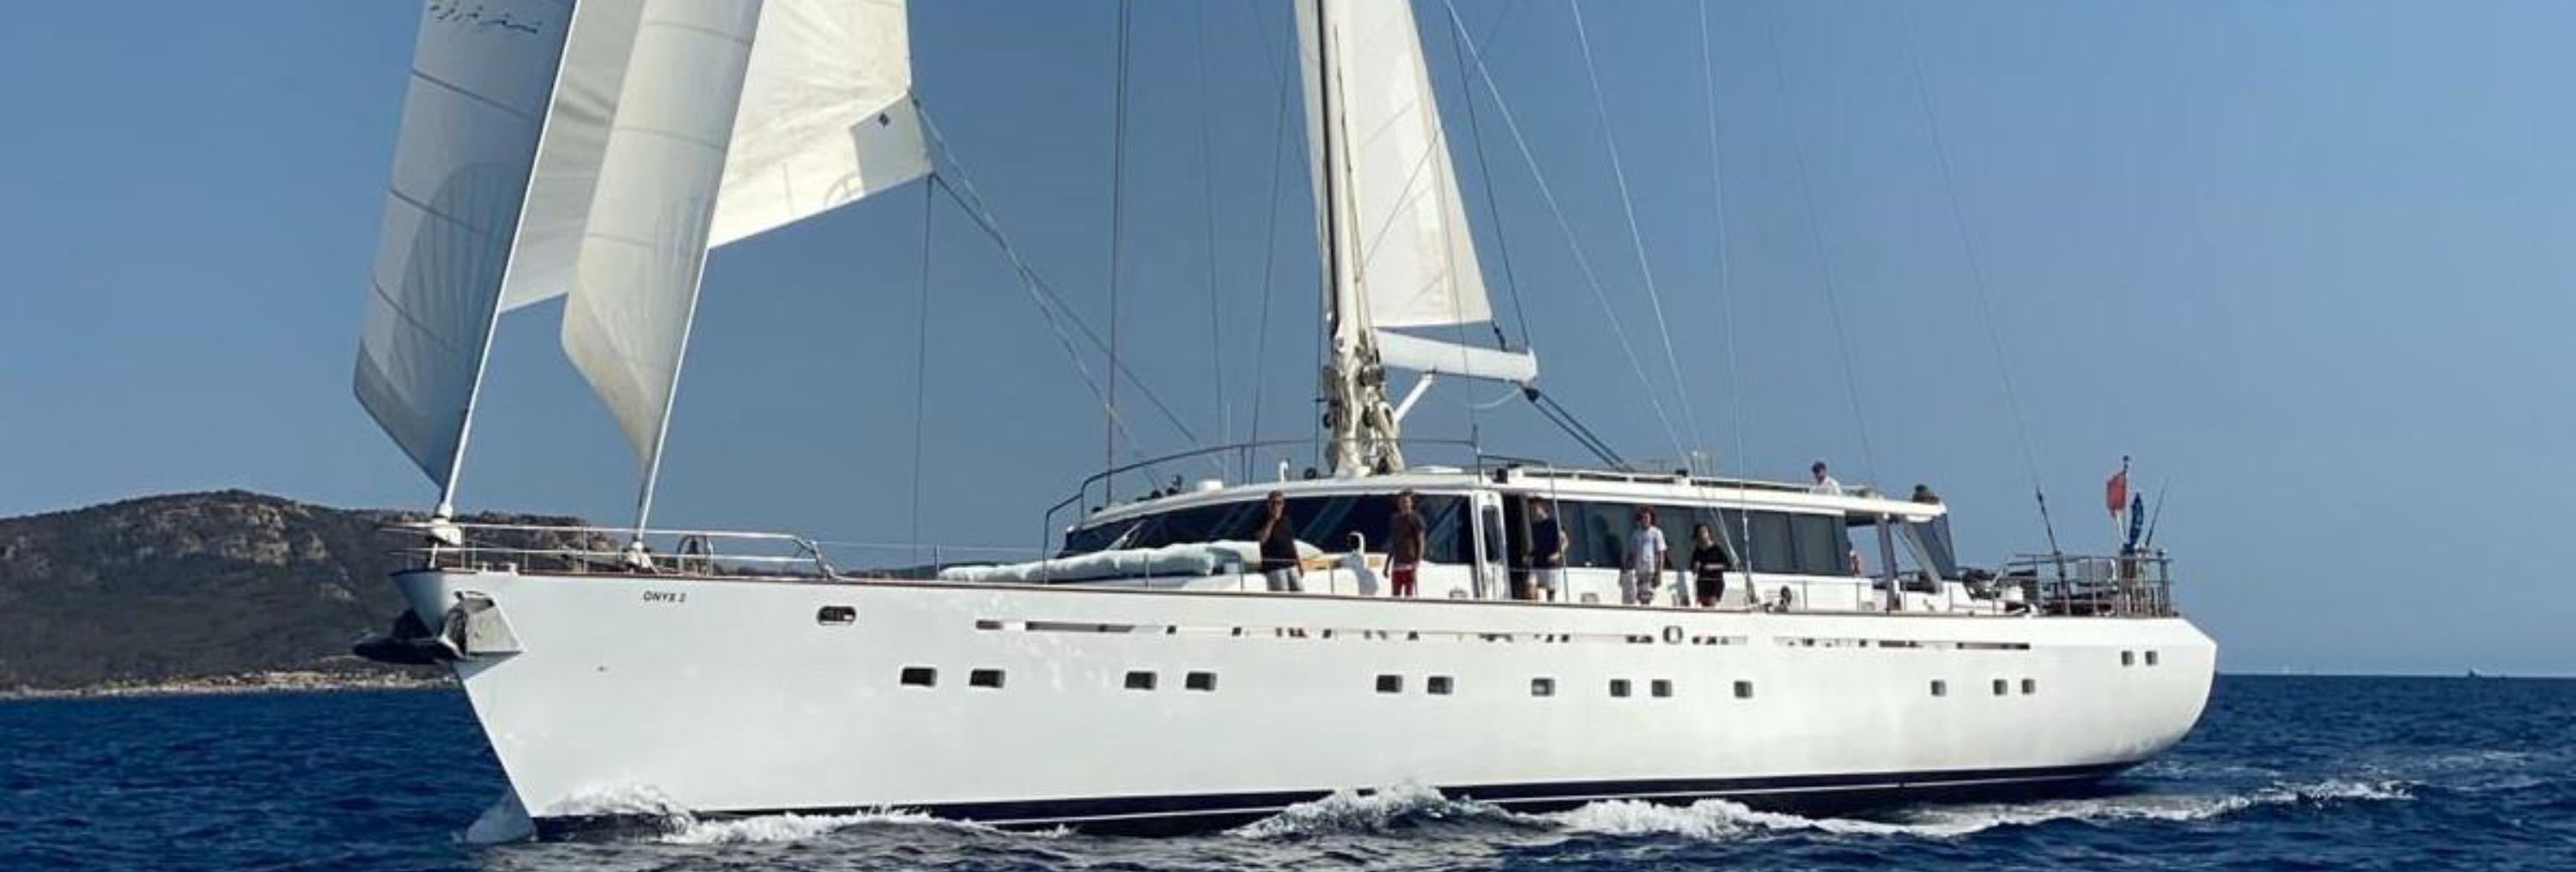 ONYX 2: New sailing yacht for sale!